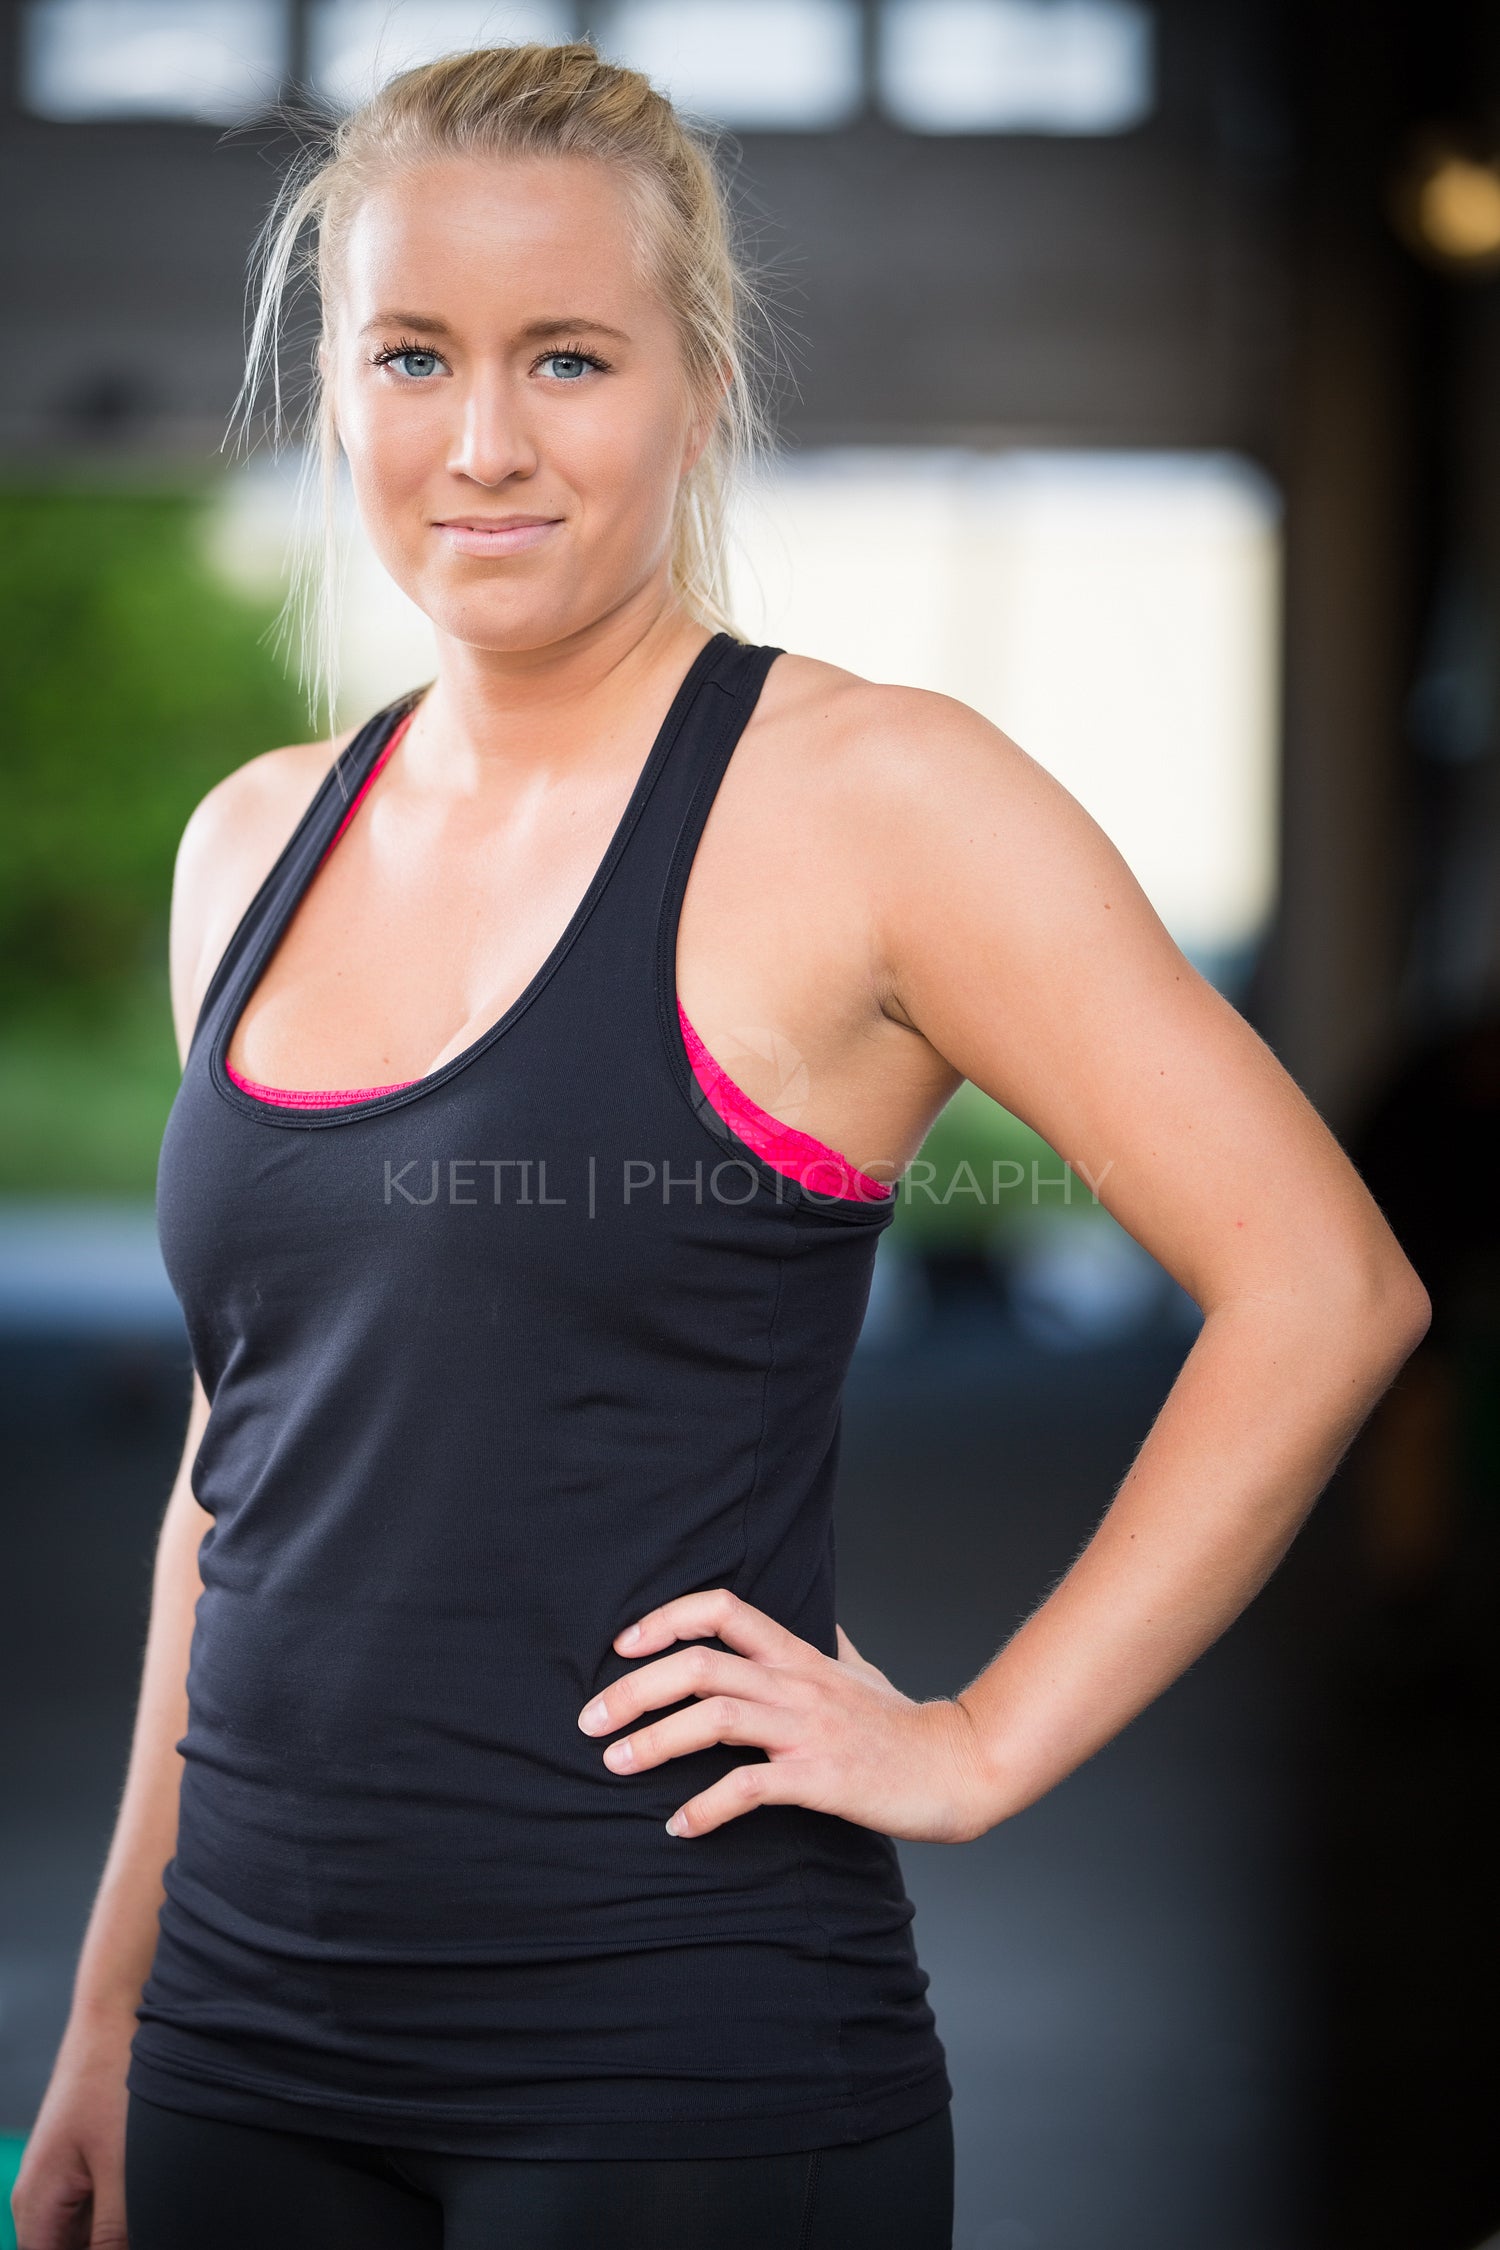 Young blonde woman in workout outfit